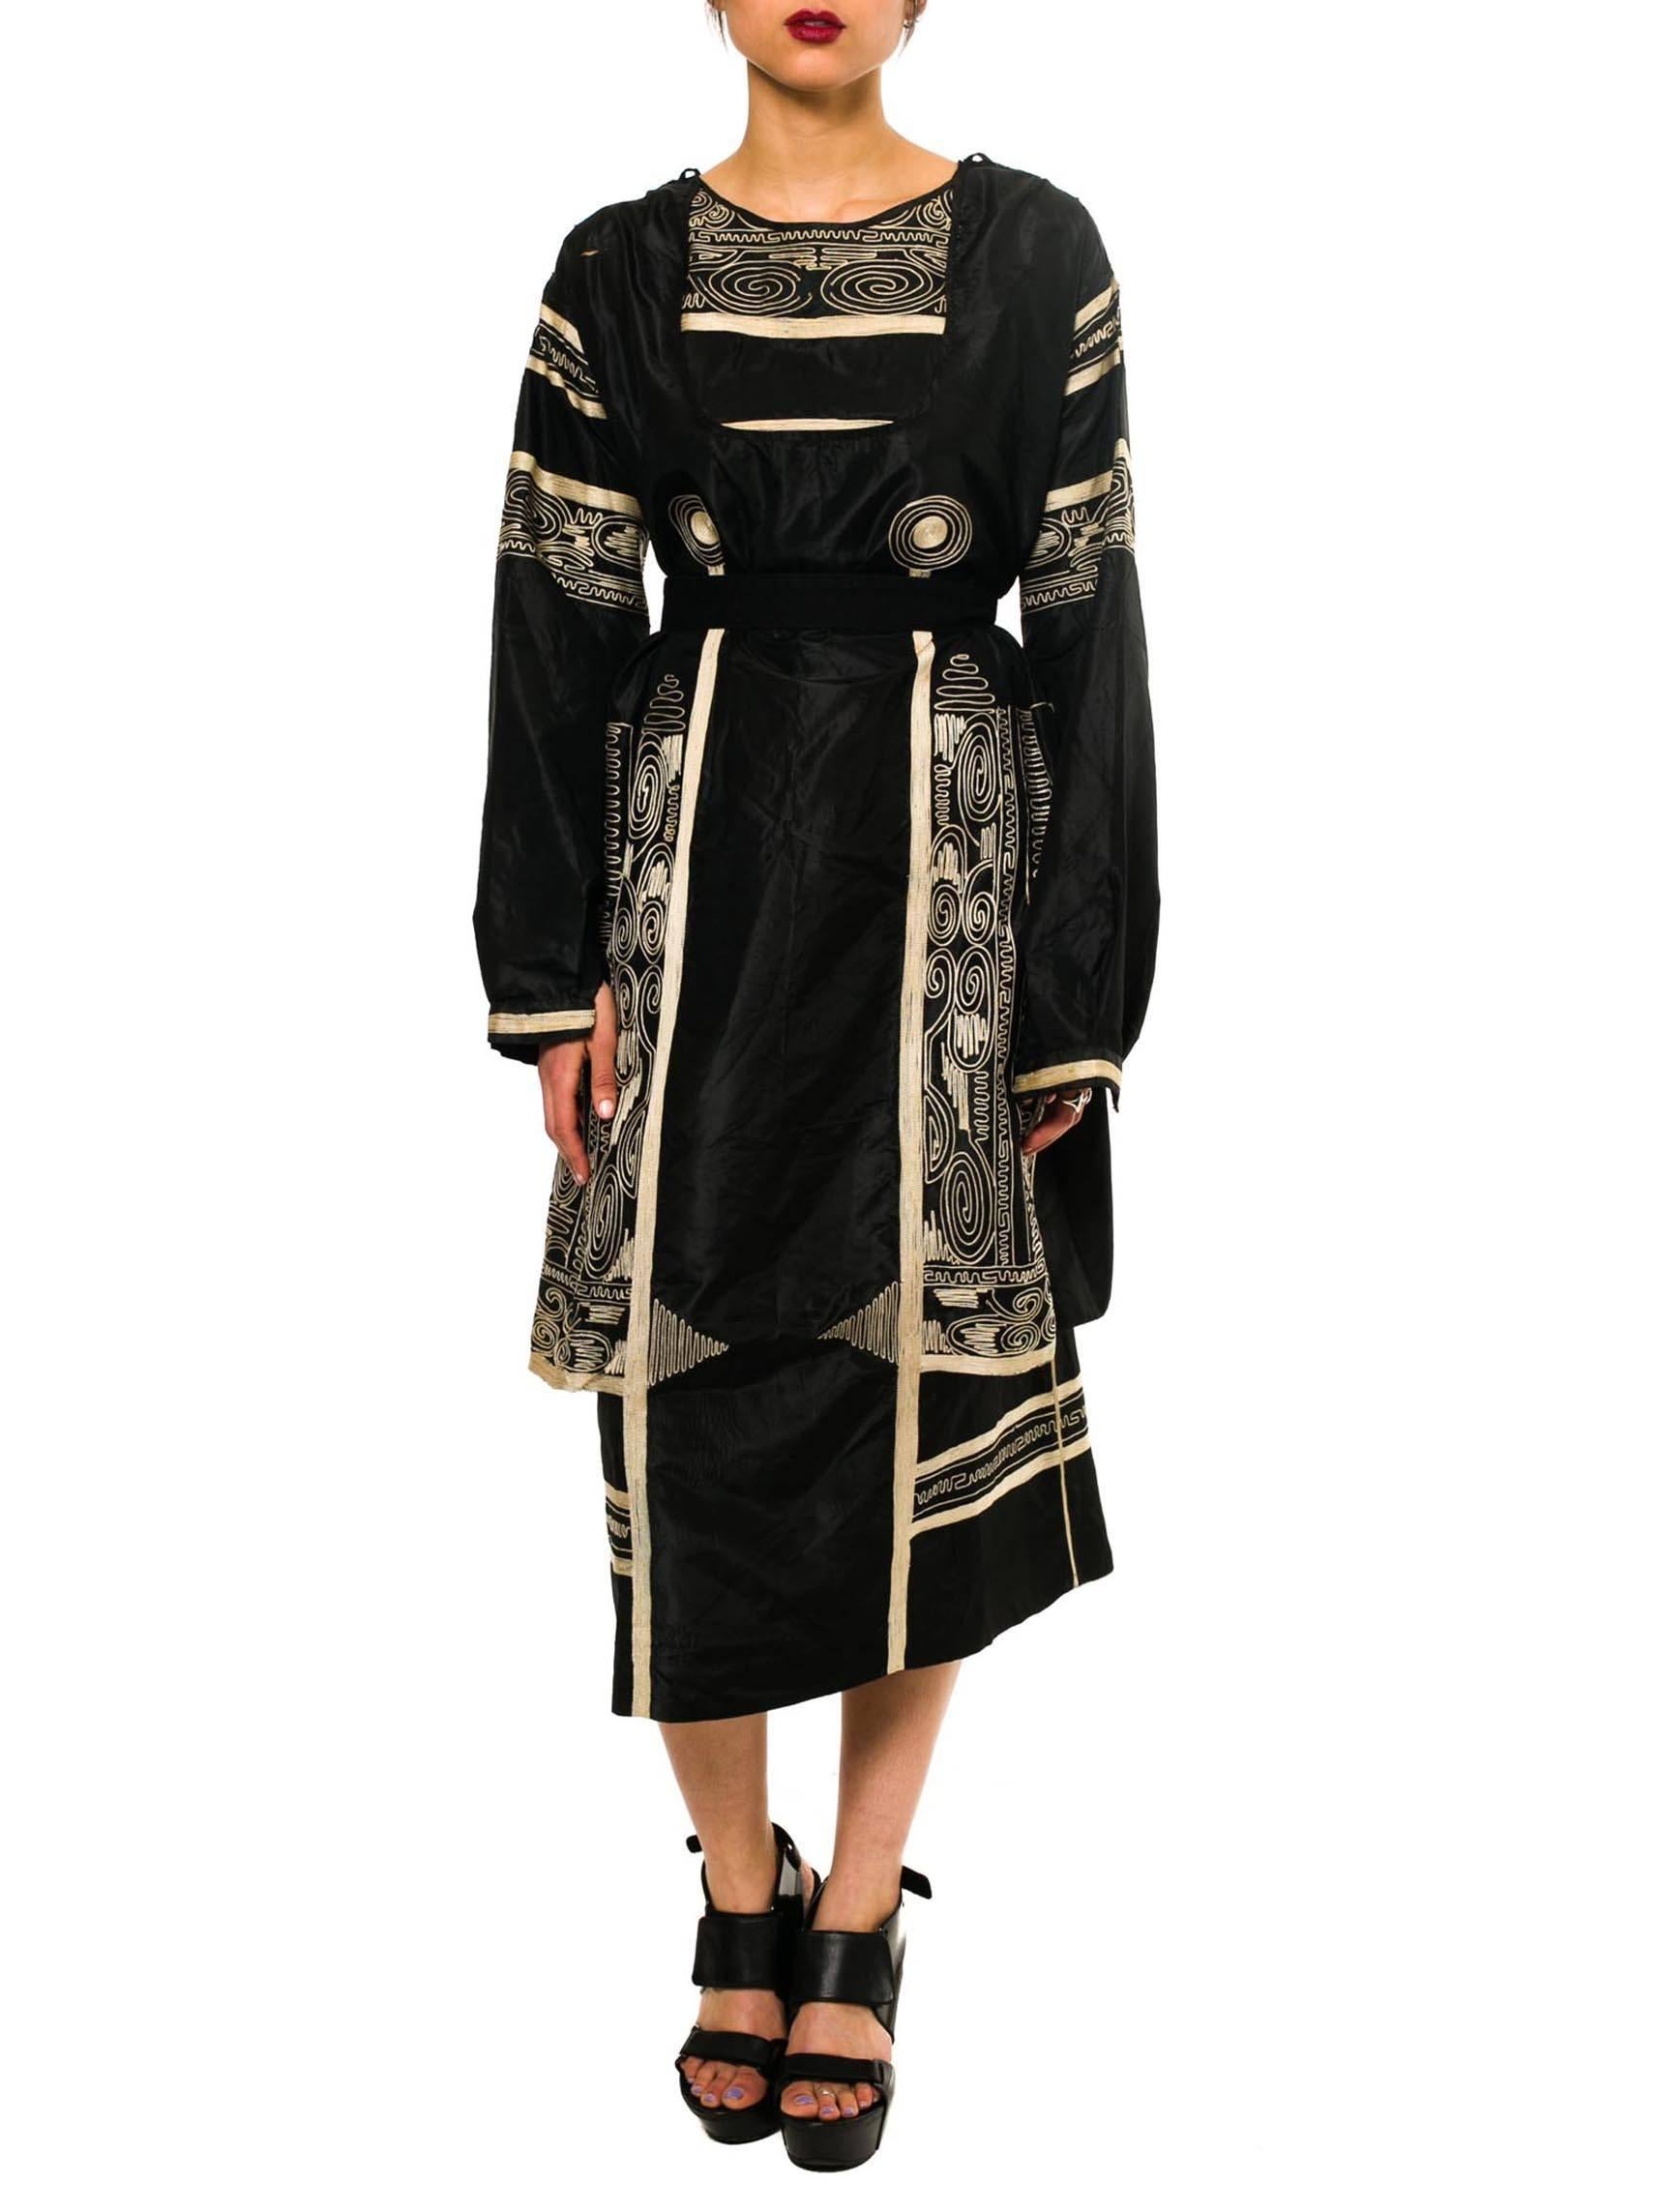 The Wiener Werkstatte was a hot spot of creative inspiration which still inspires designers today. Emilie Louise Flöge, the life companion and muse of the painter Gustav Klimt, was a fashion designer associated with the art movement. Dress